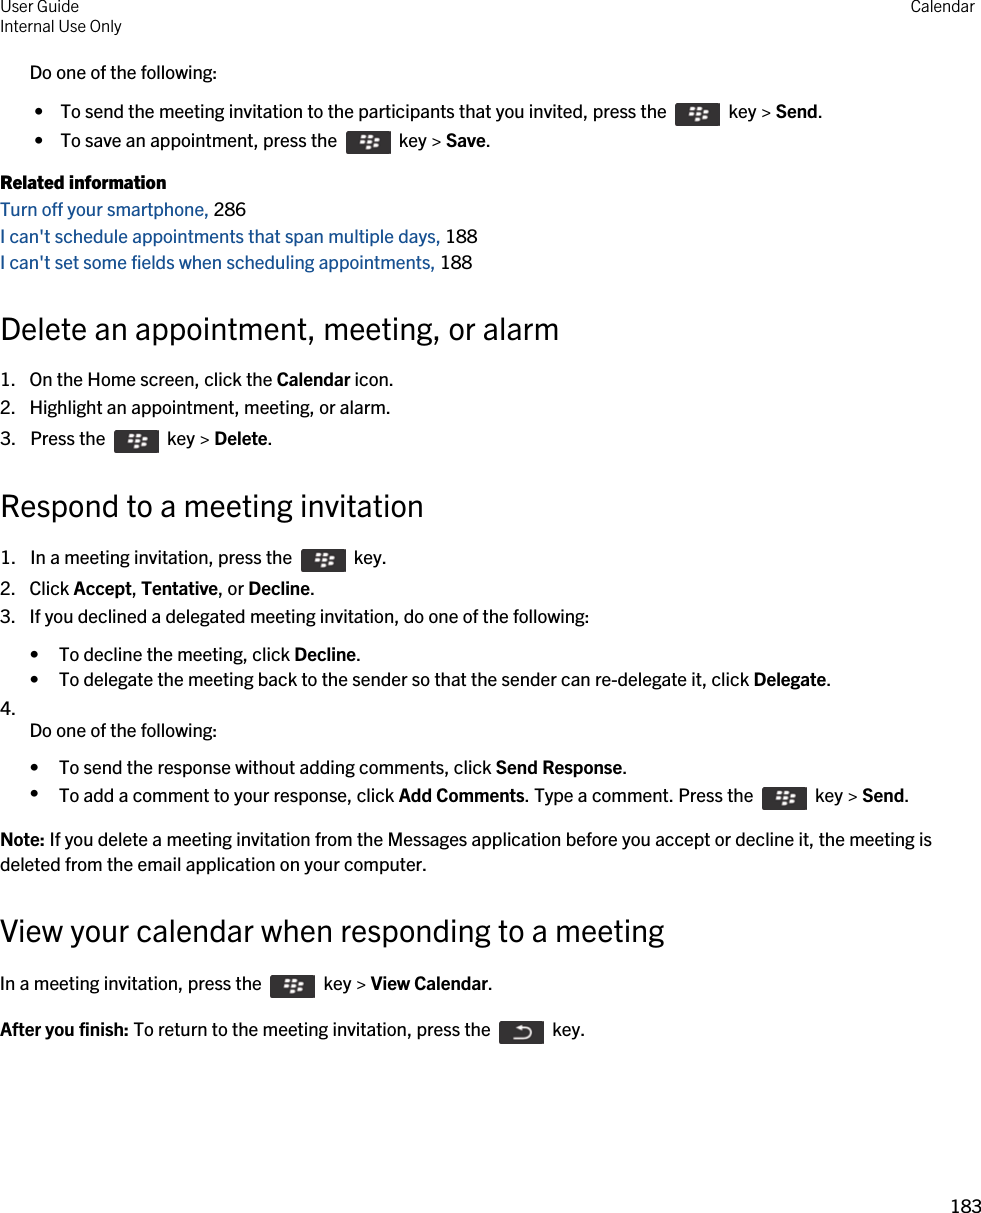 Do one of the following: •  To send the meeting invitation to the participants that you invited, press the    key &gt; Send. •  To save an appointment, press the    key &gt; Save.Related informationTurn off your smartphone, 286I can&apos;t schedule appointments that span multiple days, 188I can&apos;t set some fields when scheduling appointments, 188Delete an appointment, meeting, or alarm1. On the Home screen, click the Calendar icon.2. Highlight an appointment, meeting, or alarm.3.  Press the    key &gt; Delete. Respond to a meeting invitation1.  In a meeting invitation, press the    key. 2. Click Accept, Tentative, or Decline.3. If you declined a delegated meeting invitation, do one of the following:• To decline the meeting, click Decline.• To delegate the meeting back to the sender so that the sender can re-delegate it, click Delegate.4.  Do one of the following:• To send the response without adding comments, click Send Response.•To add a comment to your response, click Add Comments. Type a comment. Press the    key &gt; Send.Note: If you delete a meeting invitation from the Messages application before you accept or decline it, the meeting is deleted from the email application on your computer.View your calendar when responding to a meetingIn a meeting invitation, press the    key &gt; View Calendar.After you finish: To return to the meeting invitation, press the    key.User GuideInternal Use Only Calendar183 